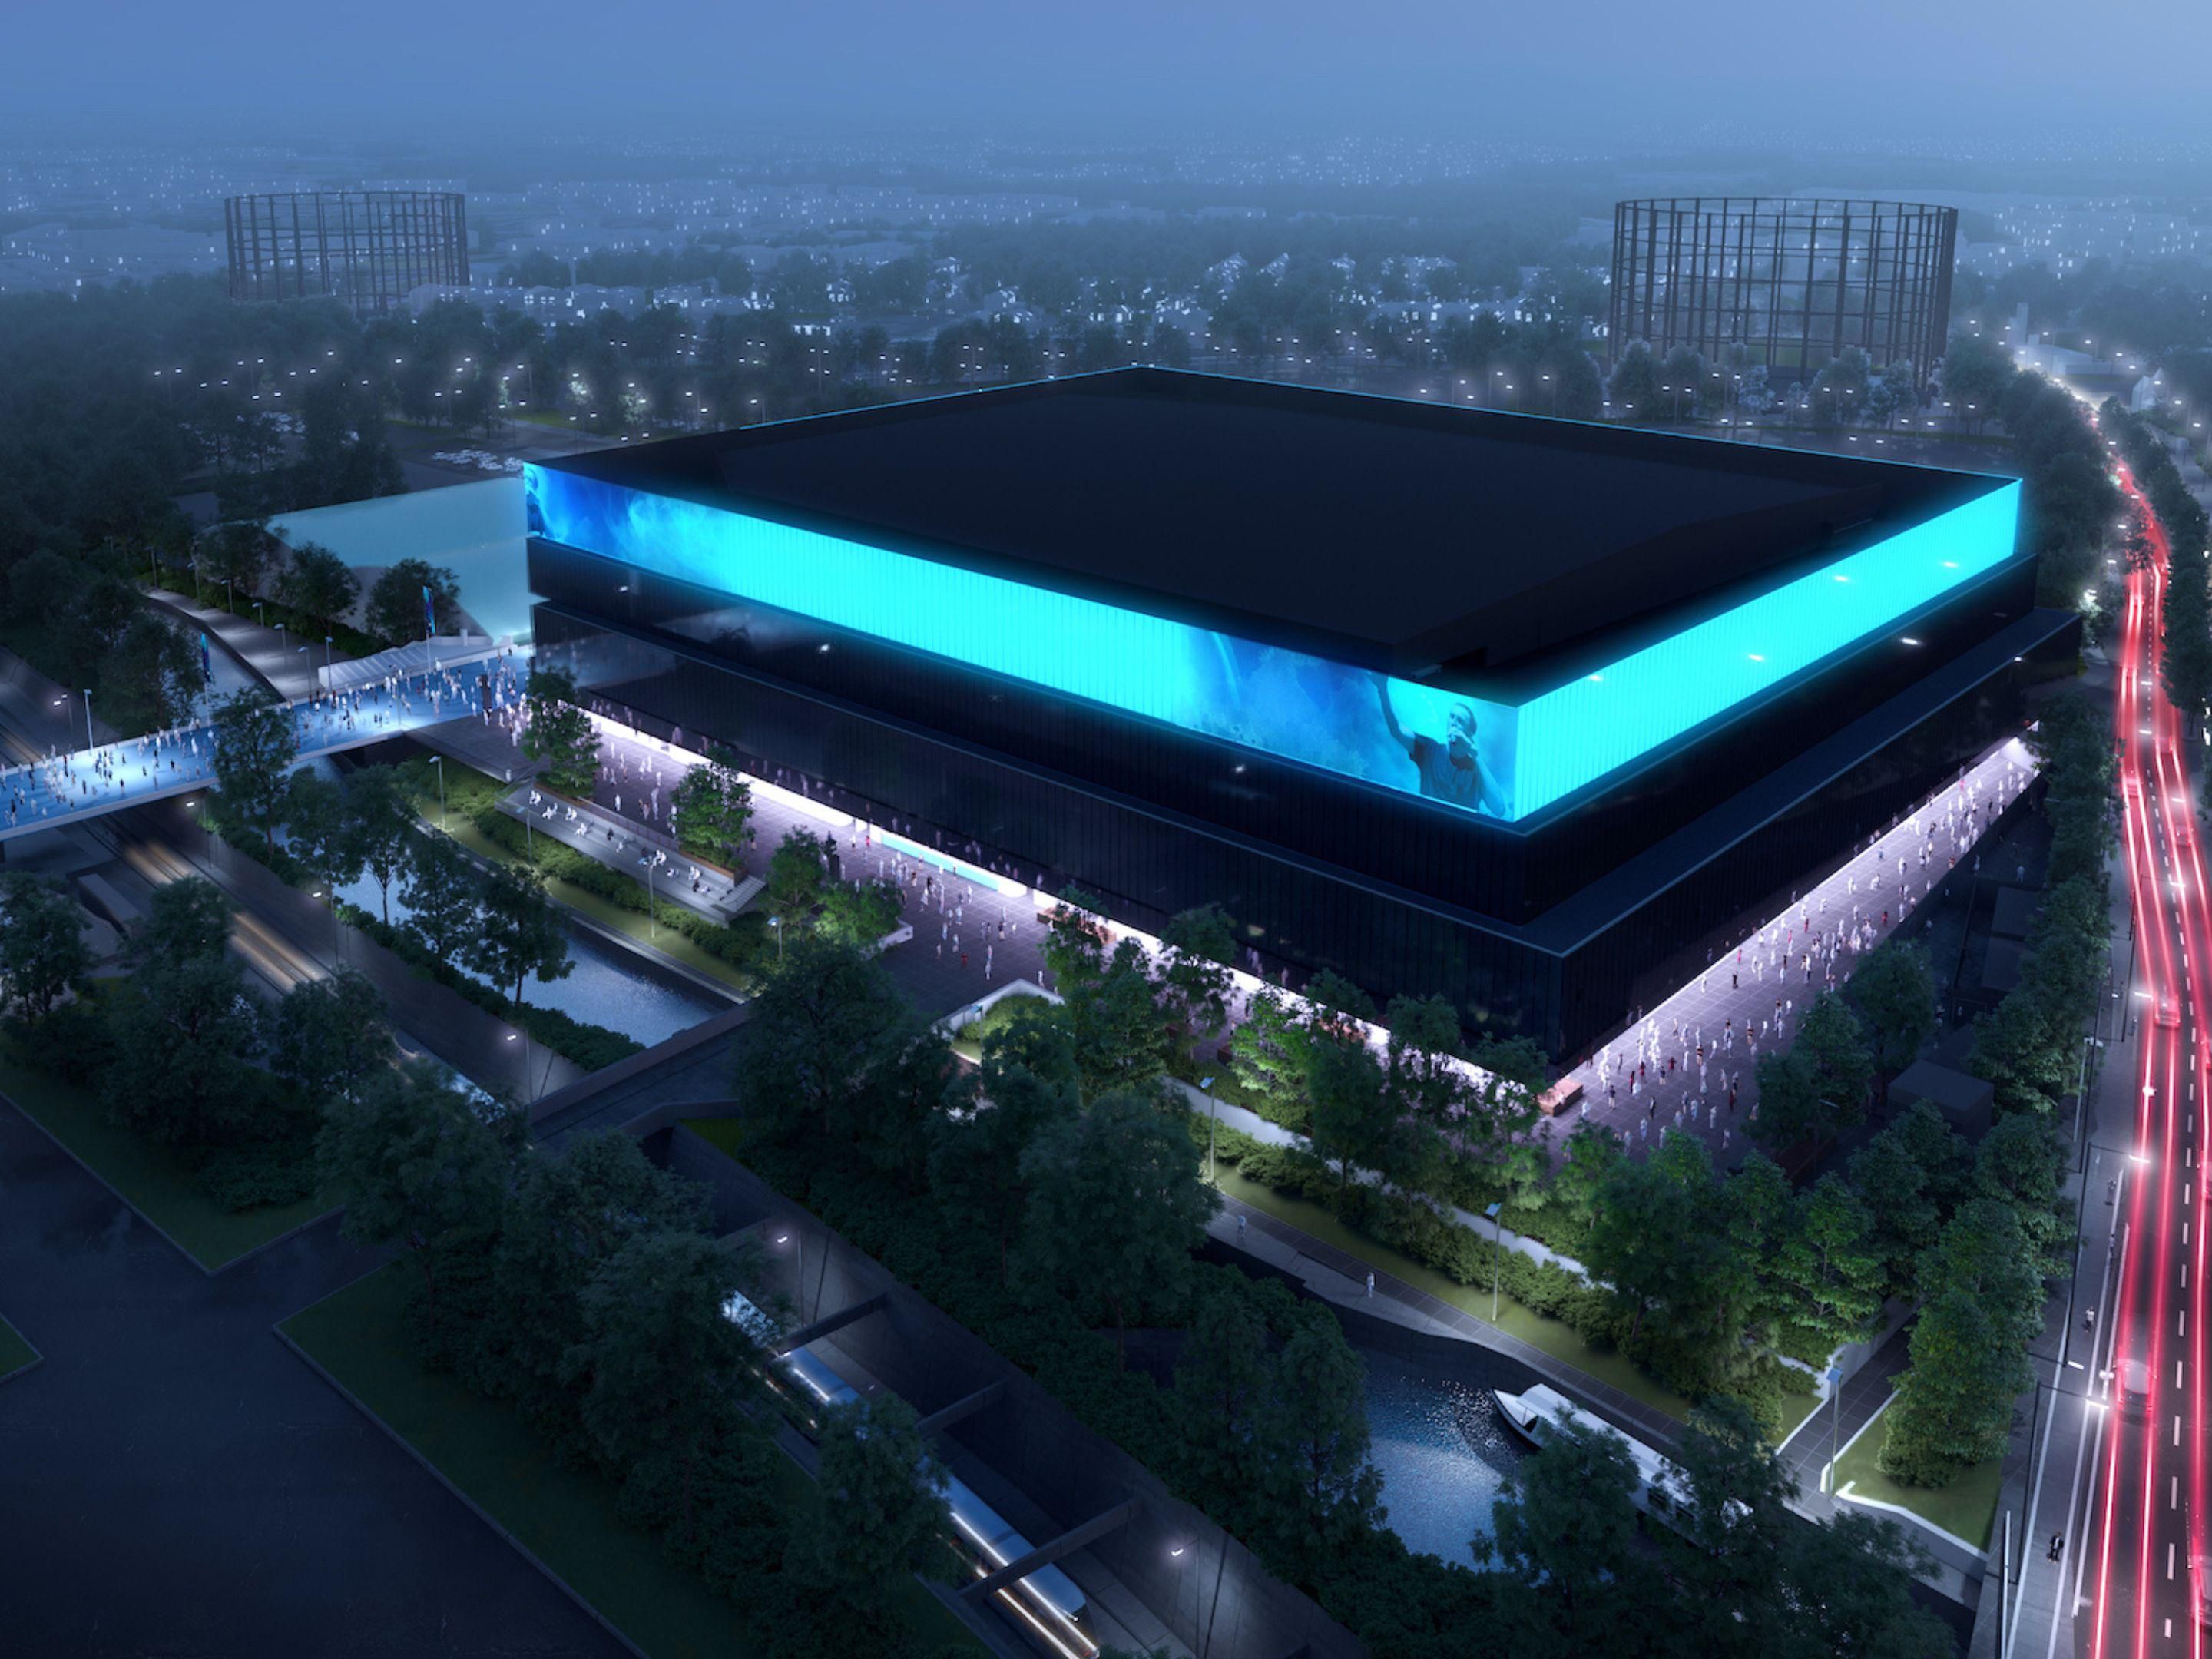 Due to open in 2023, the arena will be the largest of its kind in the UK. Offering the very best experience in live music, the world-class venue will be opening its doors just 1.2 miles from the Holiday Inn Manchester - Central Park. For further information, please inquire via the 'Learn More' link.